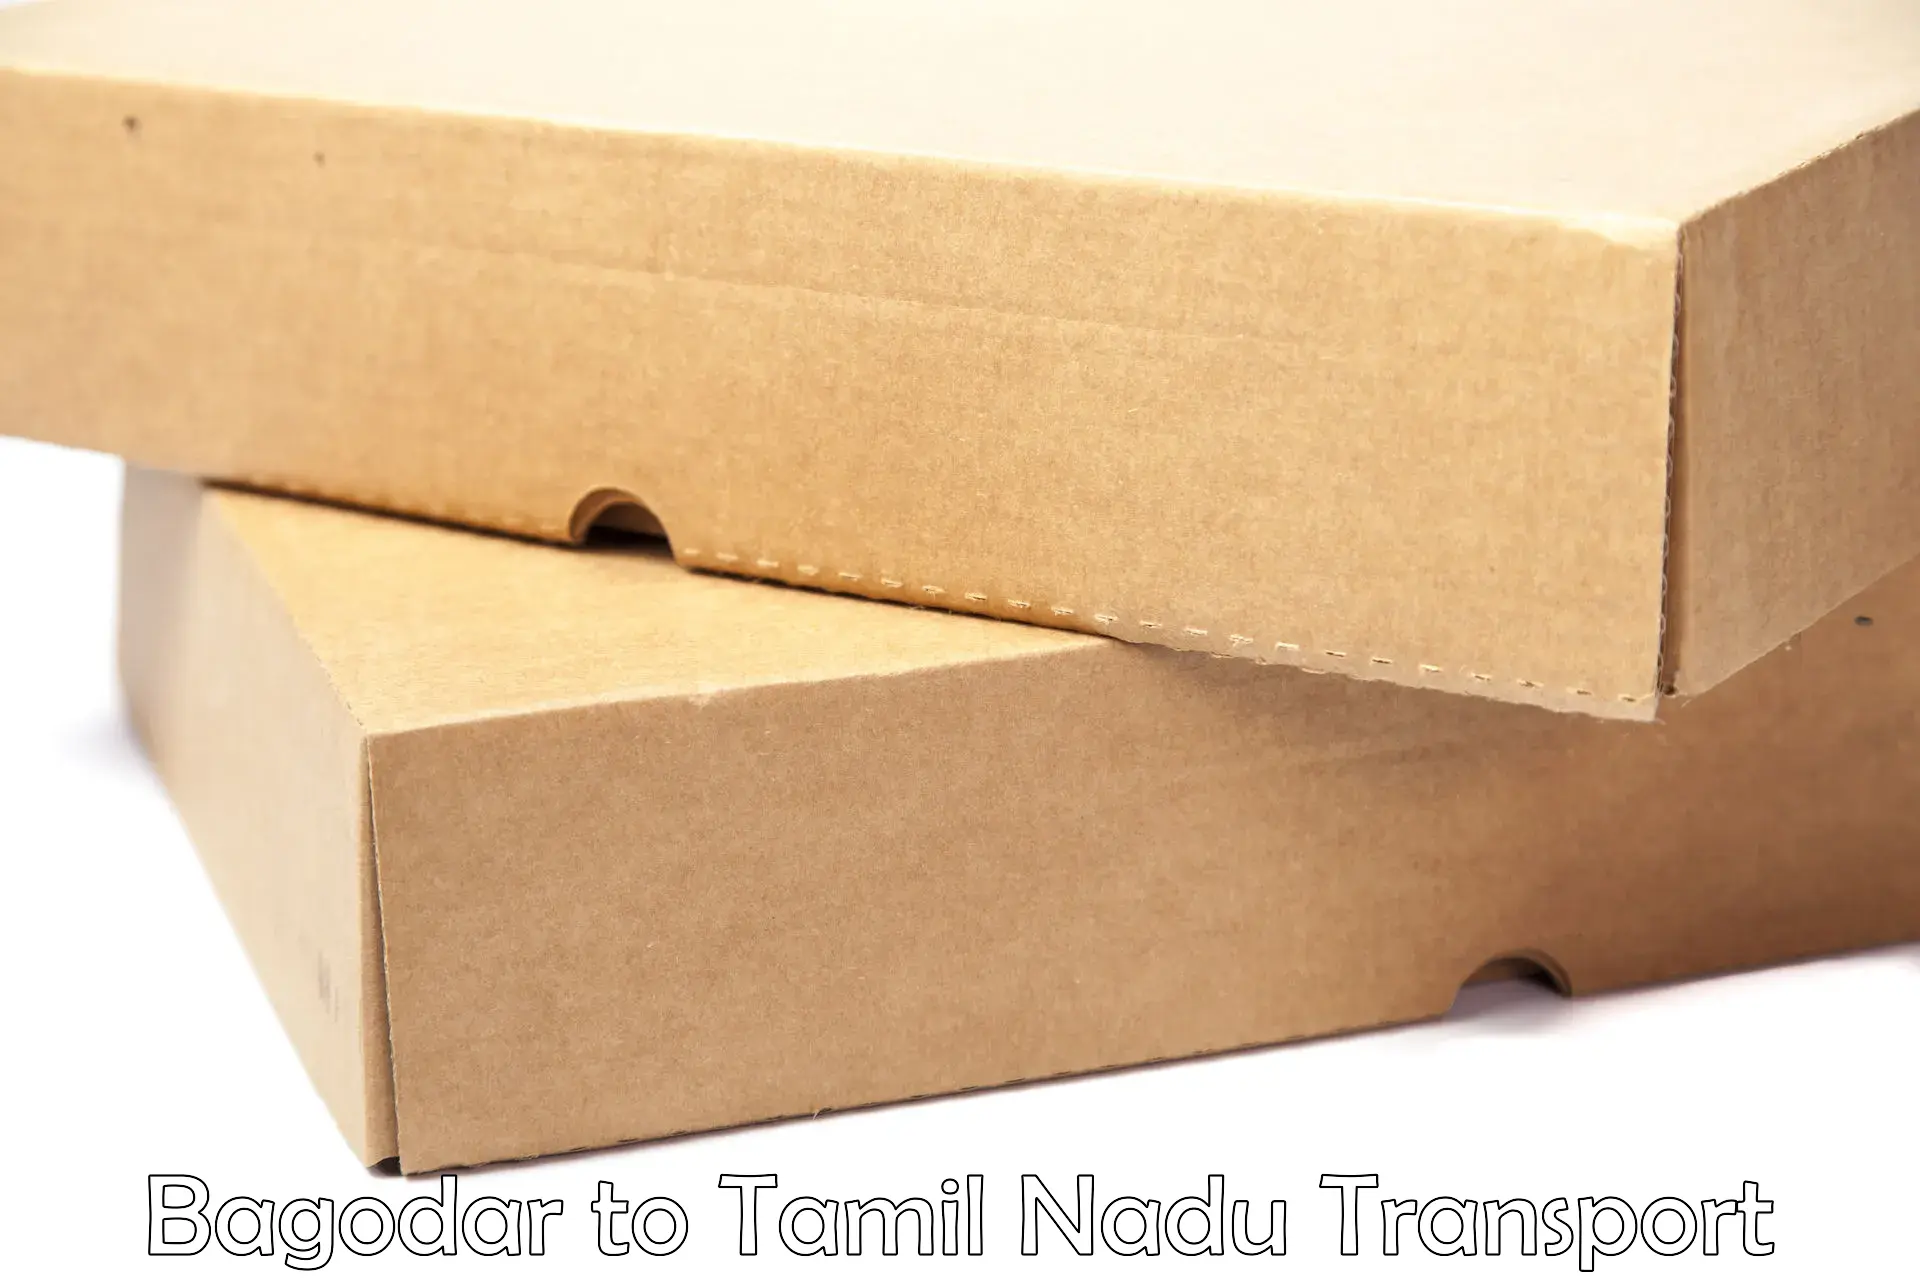 Cargo transport services Bagodar to Vellore Institute of Technology